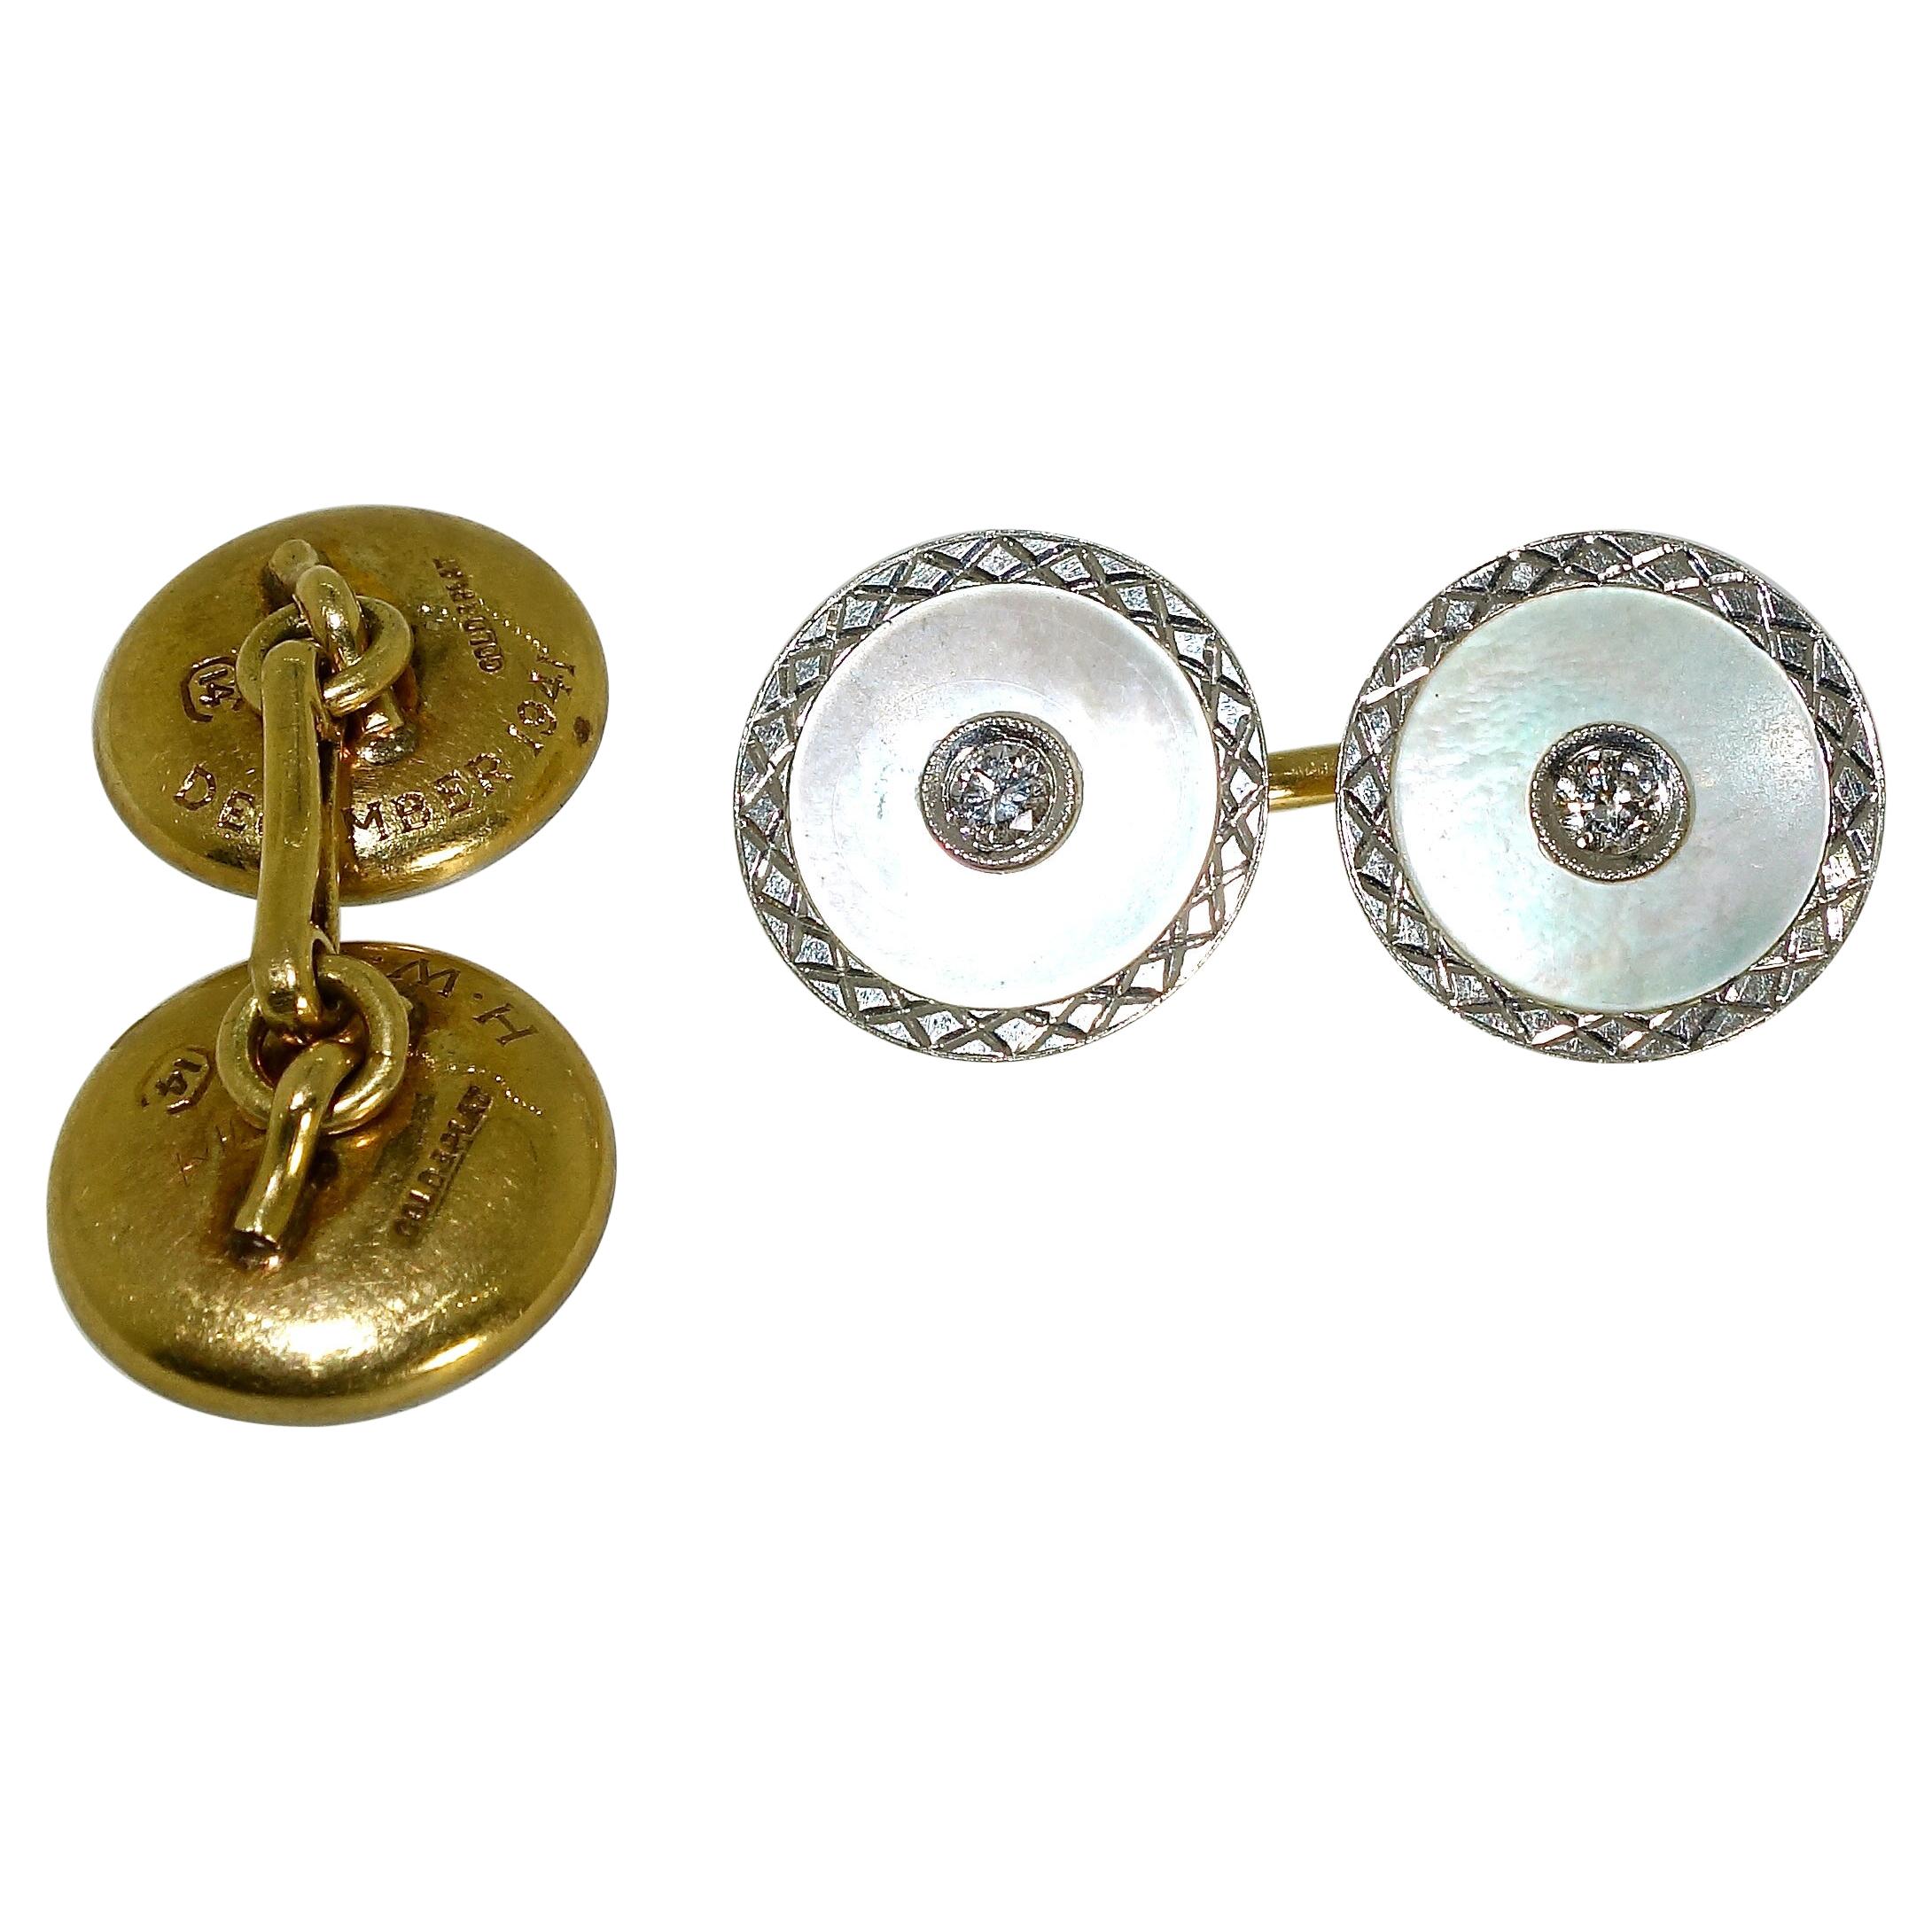 Vintage Diamond Cufflinks with Mother of Pearl in Platinum, circa 1925